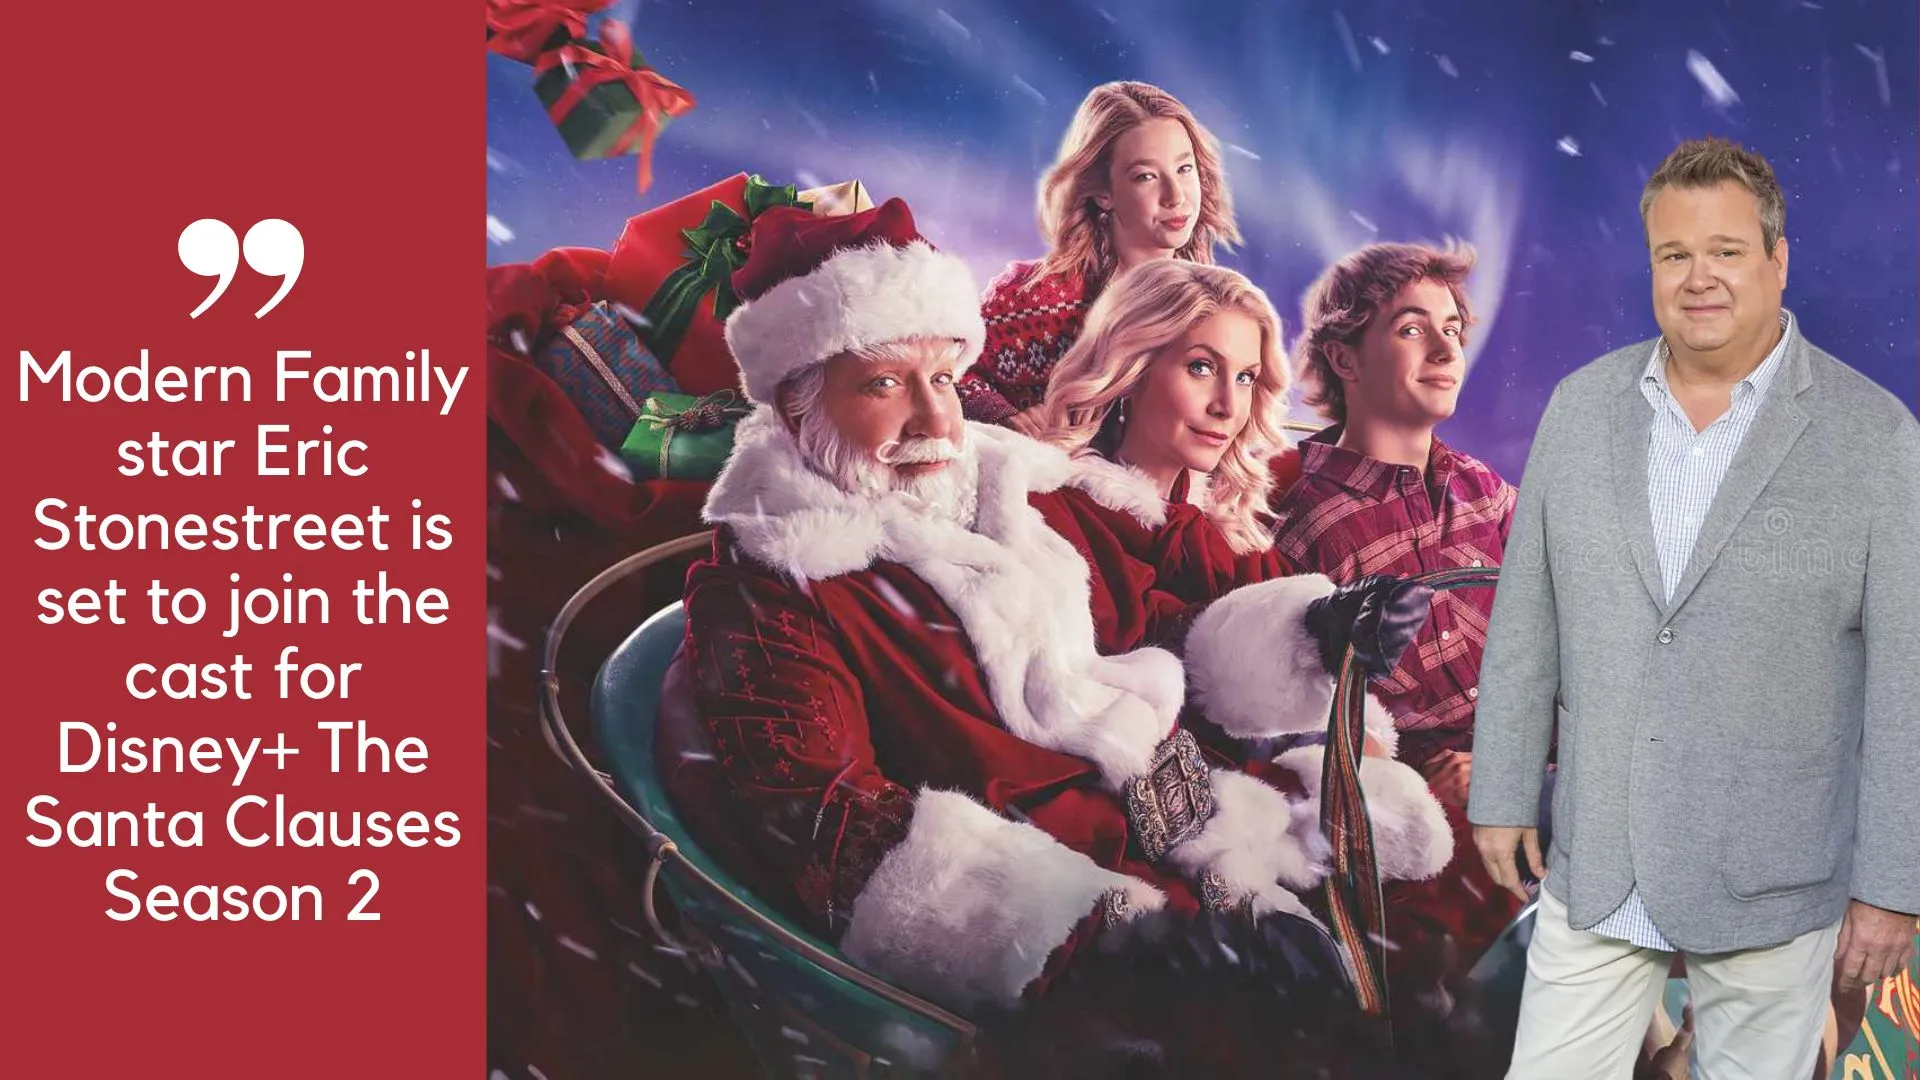 Modern Family star Eric Stonestreet is set to join the cast for Disney+ The Santa Clauses Season 2 (Image credit: disney)